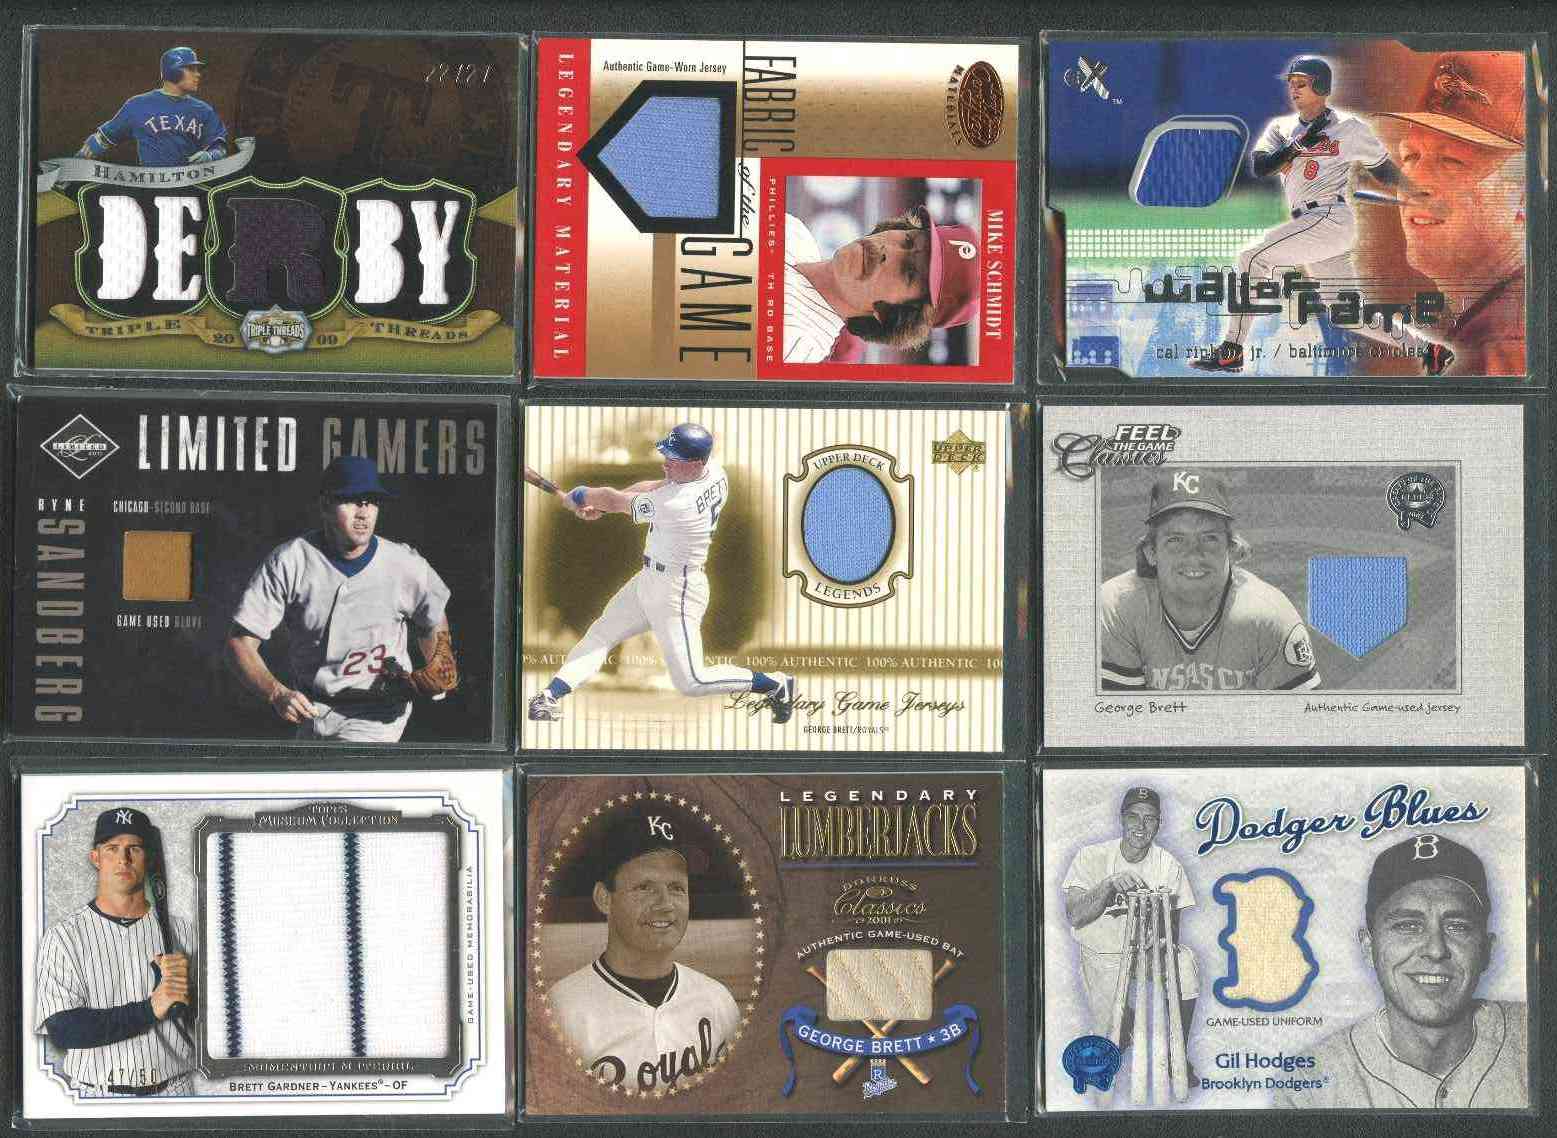 Mike Schmidt - 2001 Leaf Certified Mat. FABRIC..GAME GAME-USED JERSEY FG-19 Baseball cards value